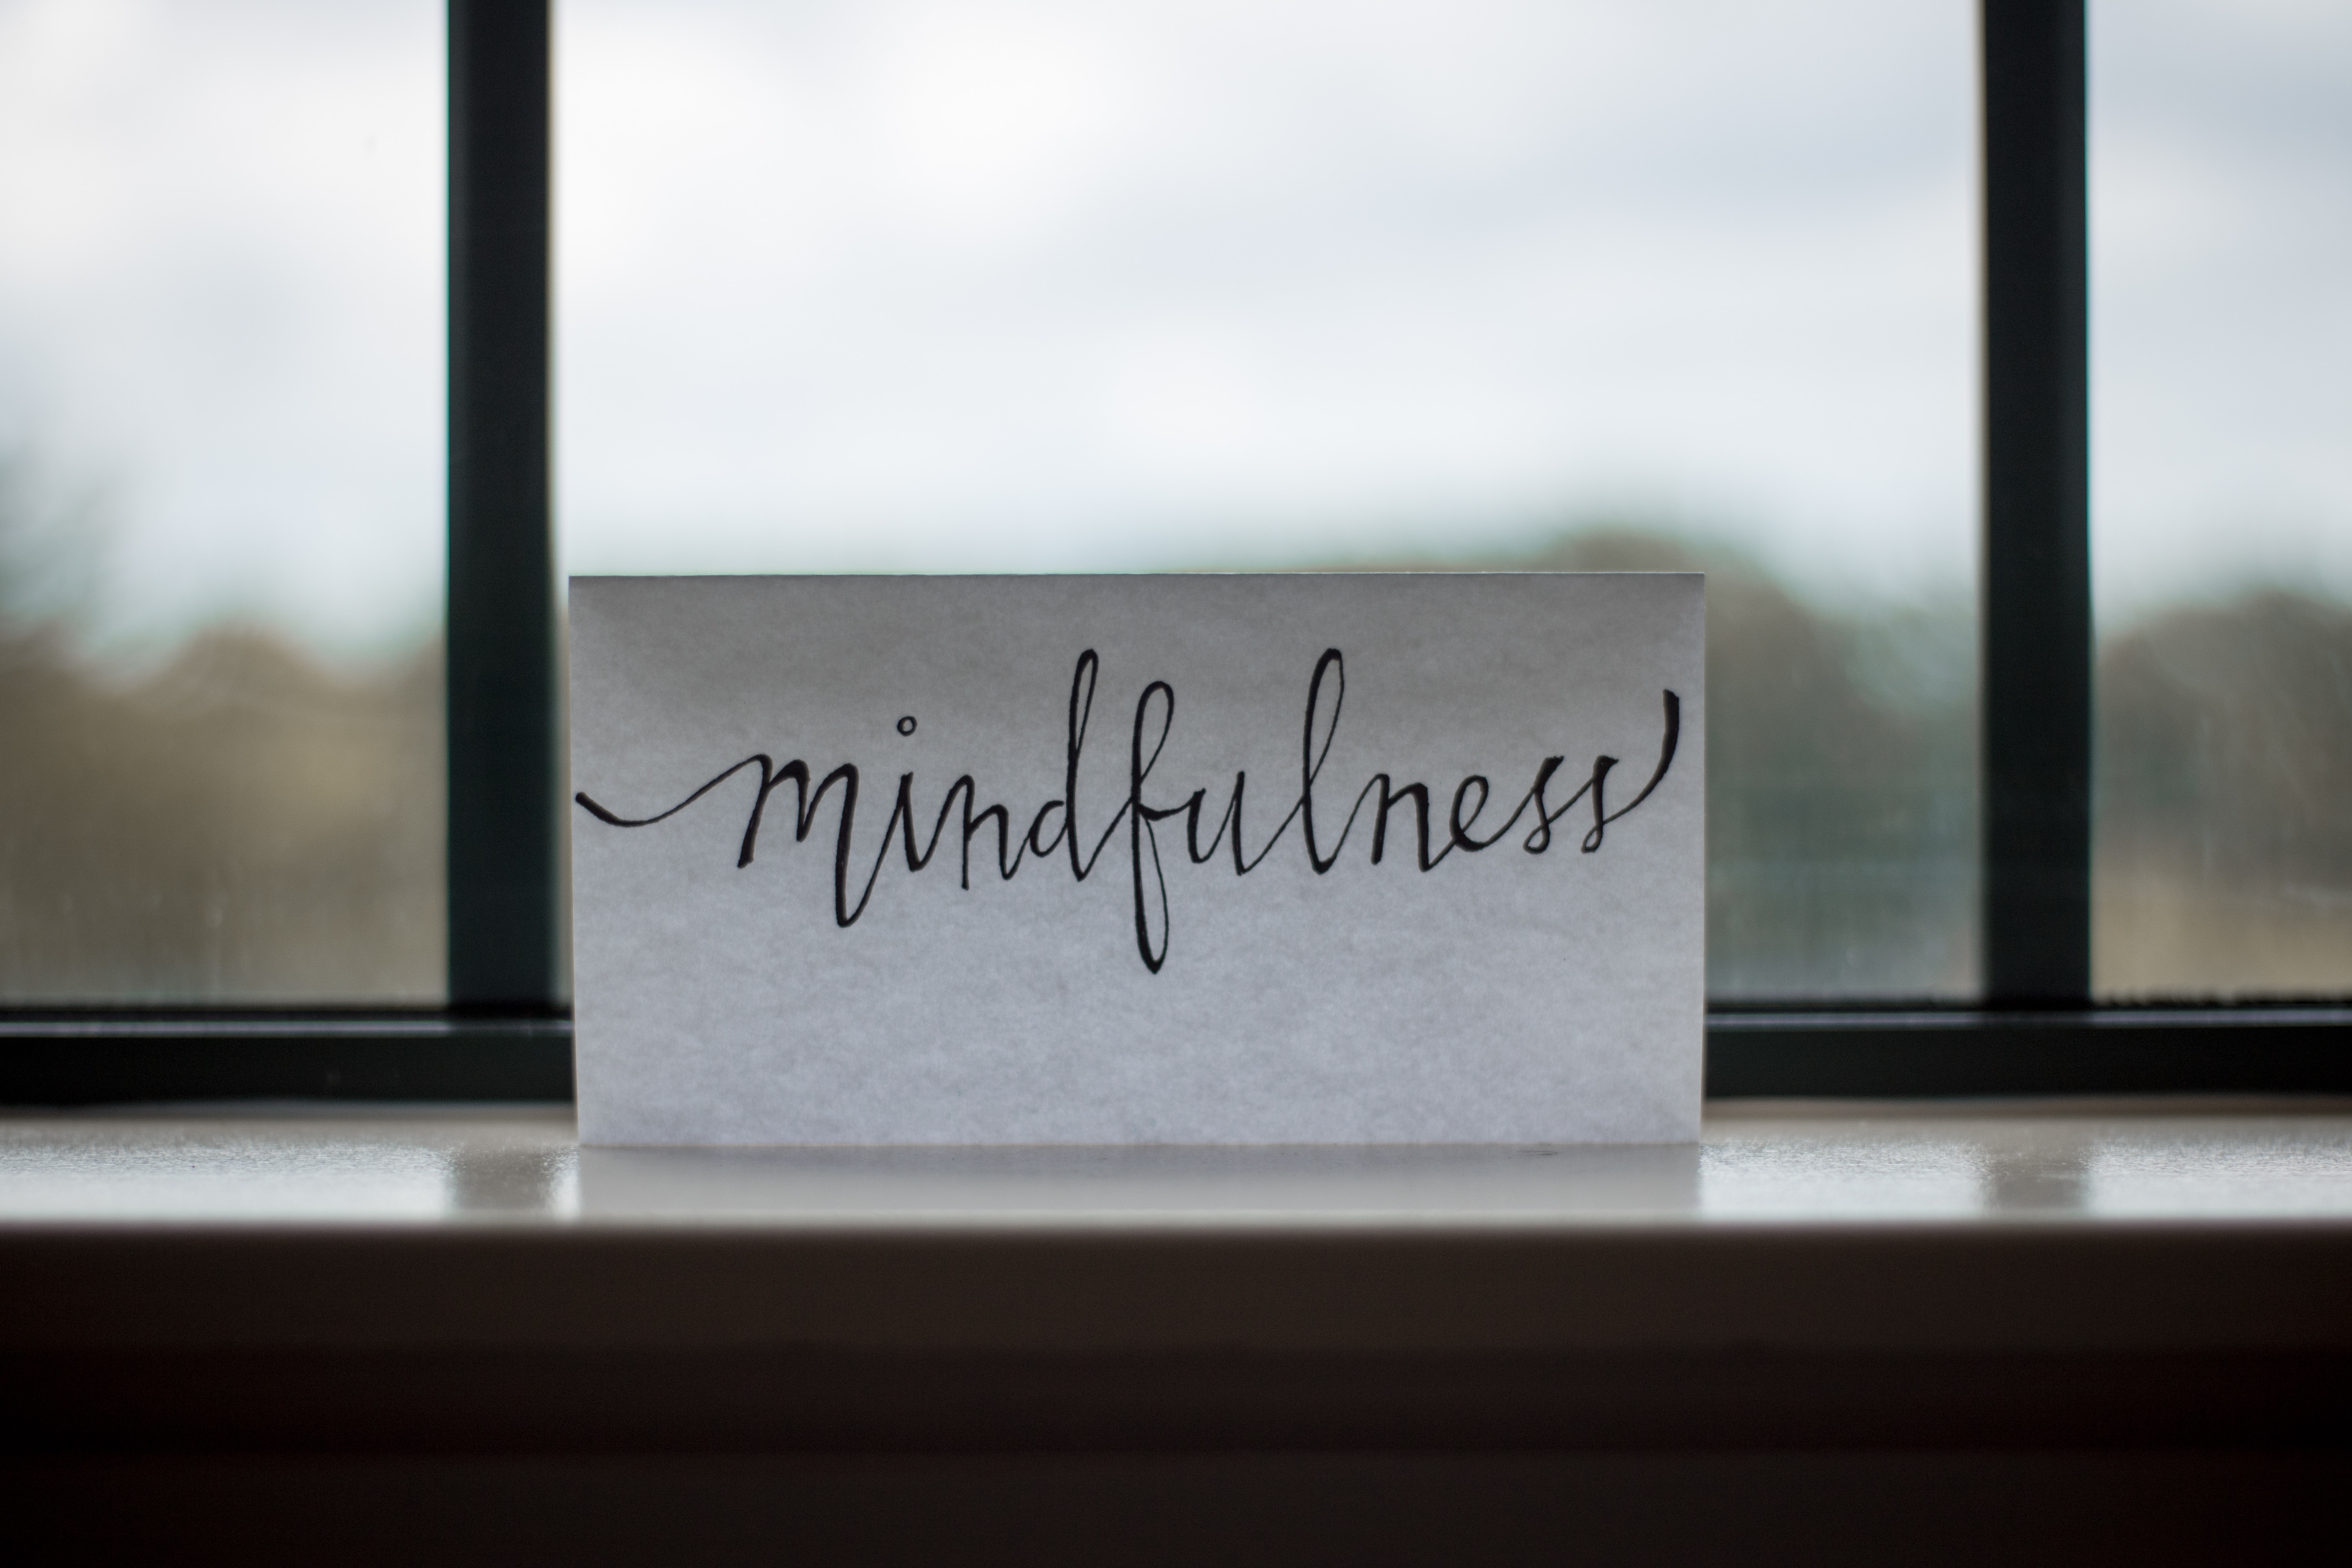 "Mindfulness" wrritten on white paper, standing on the window ledge